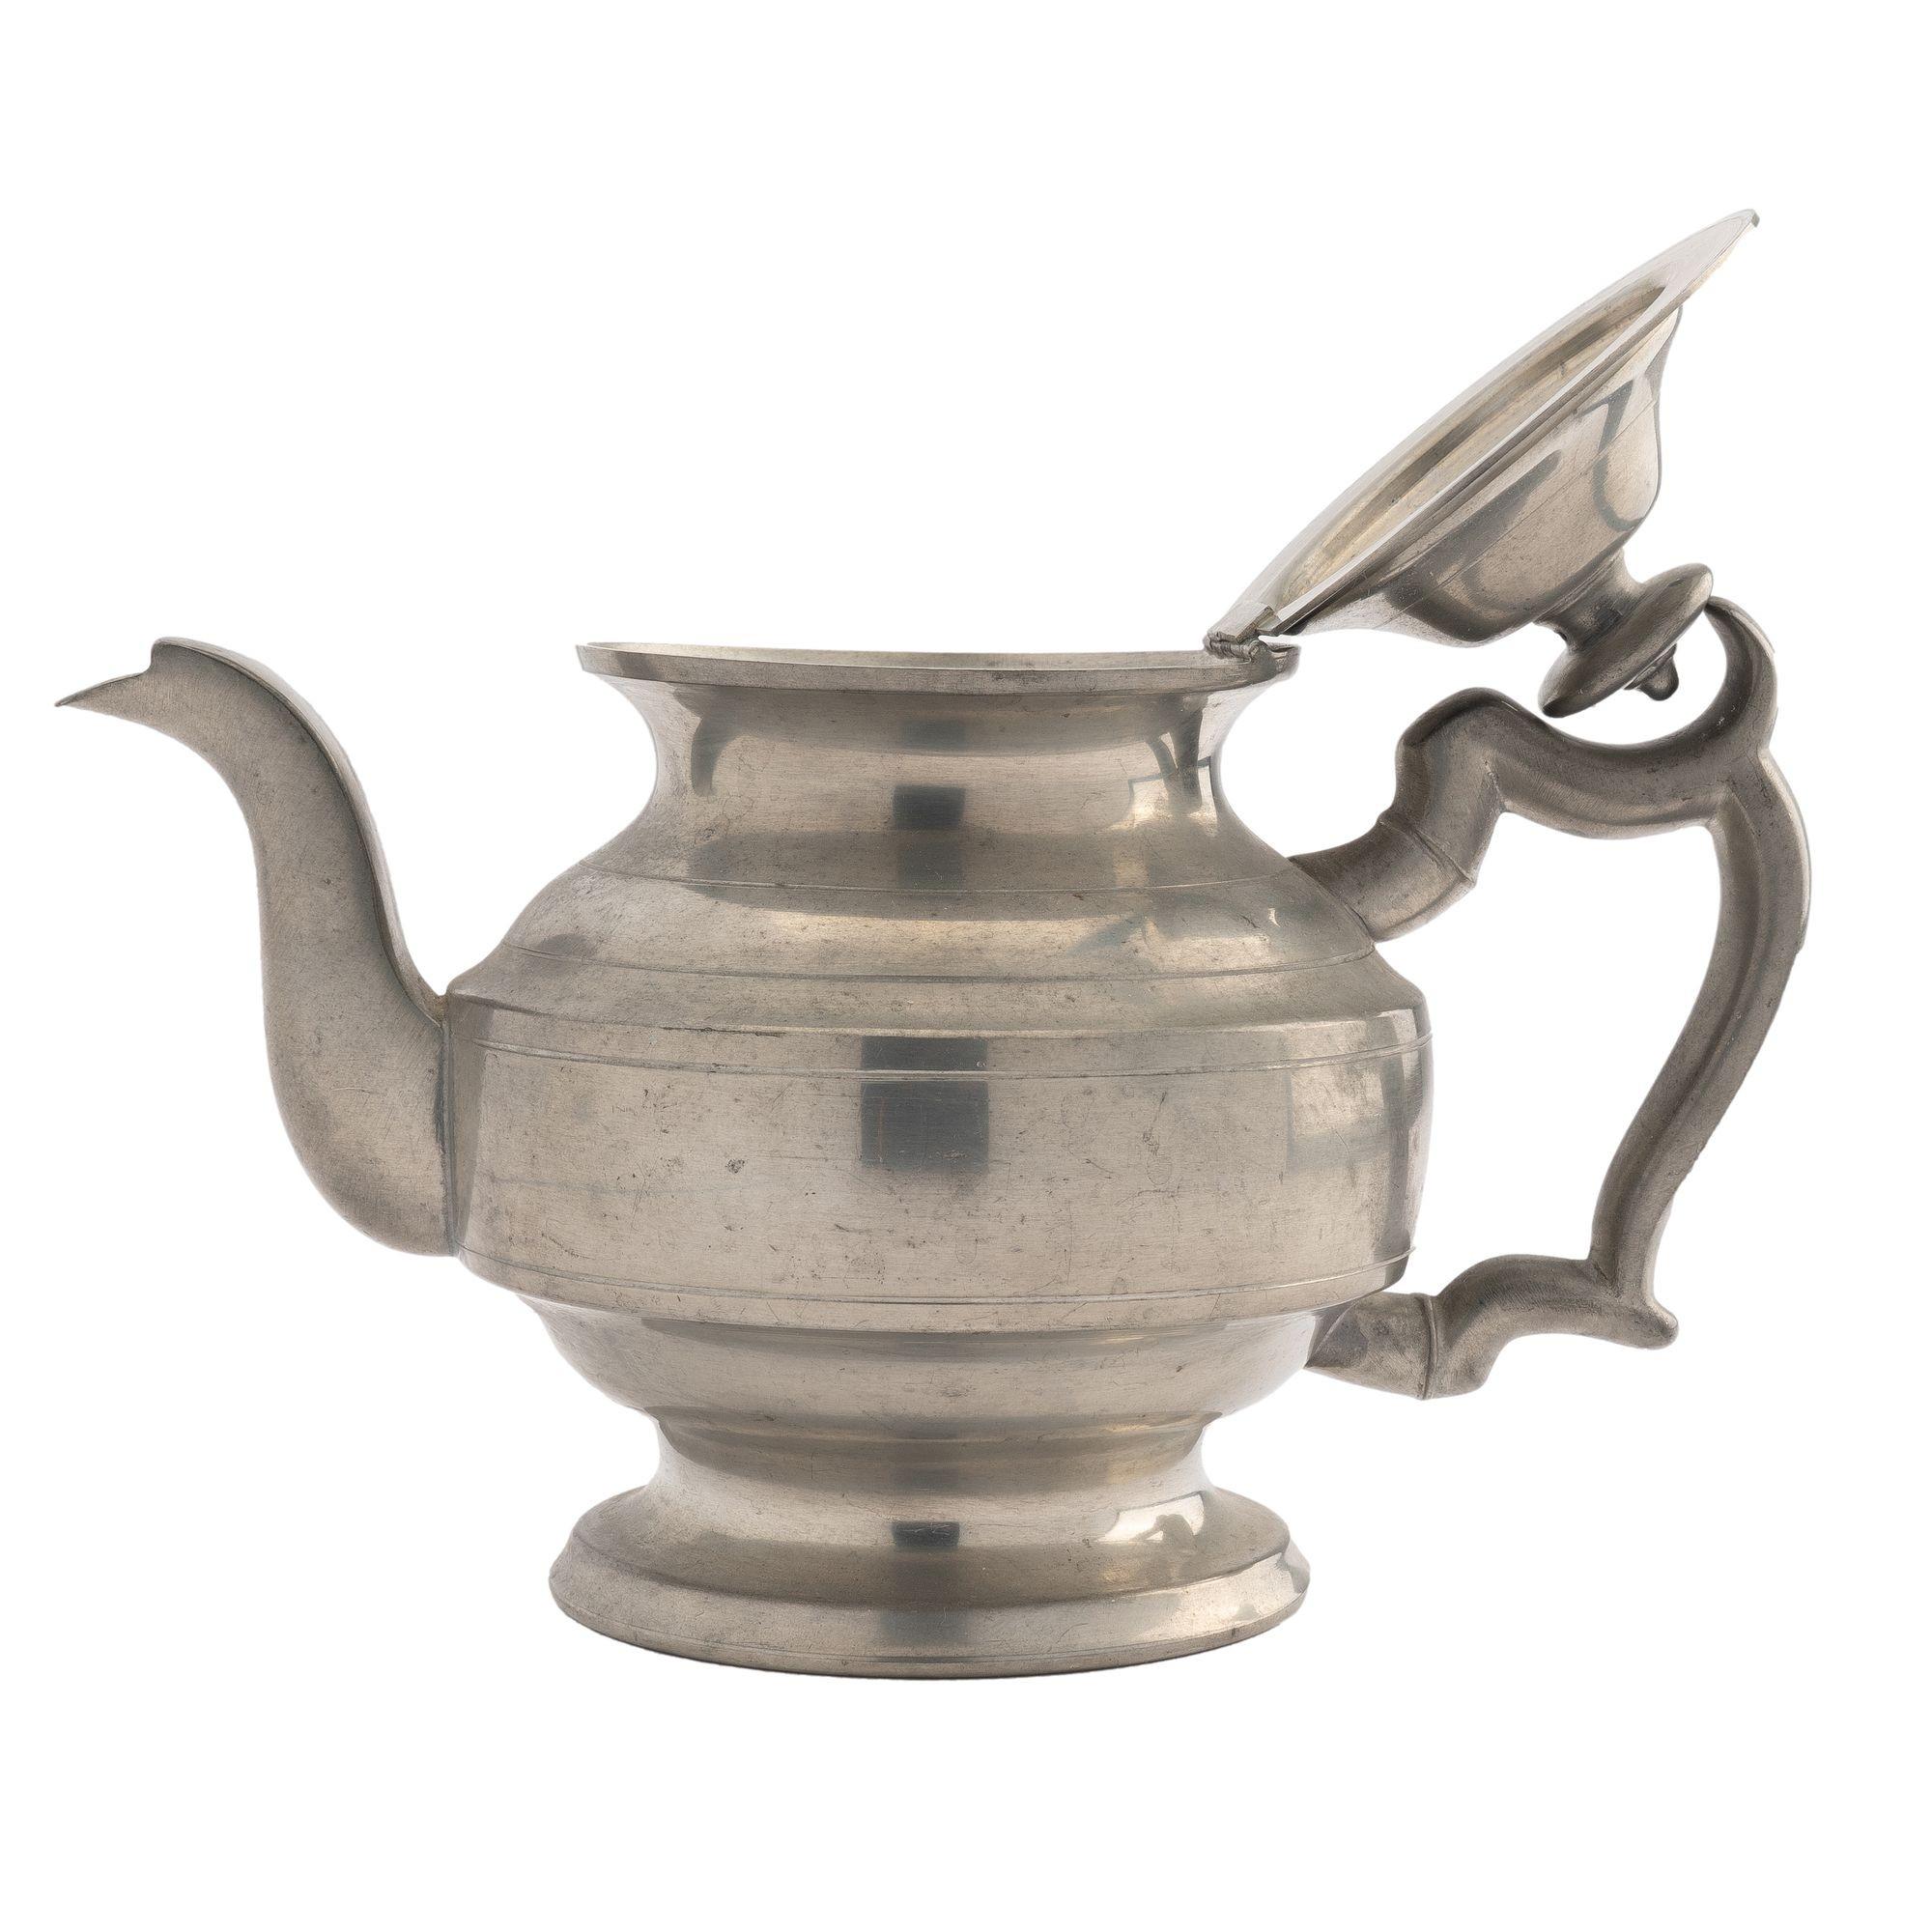 Woodbury Pewter Academic Revival Pewter Holloware Teapot, 1952 For Sale 4